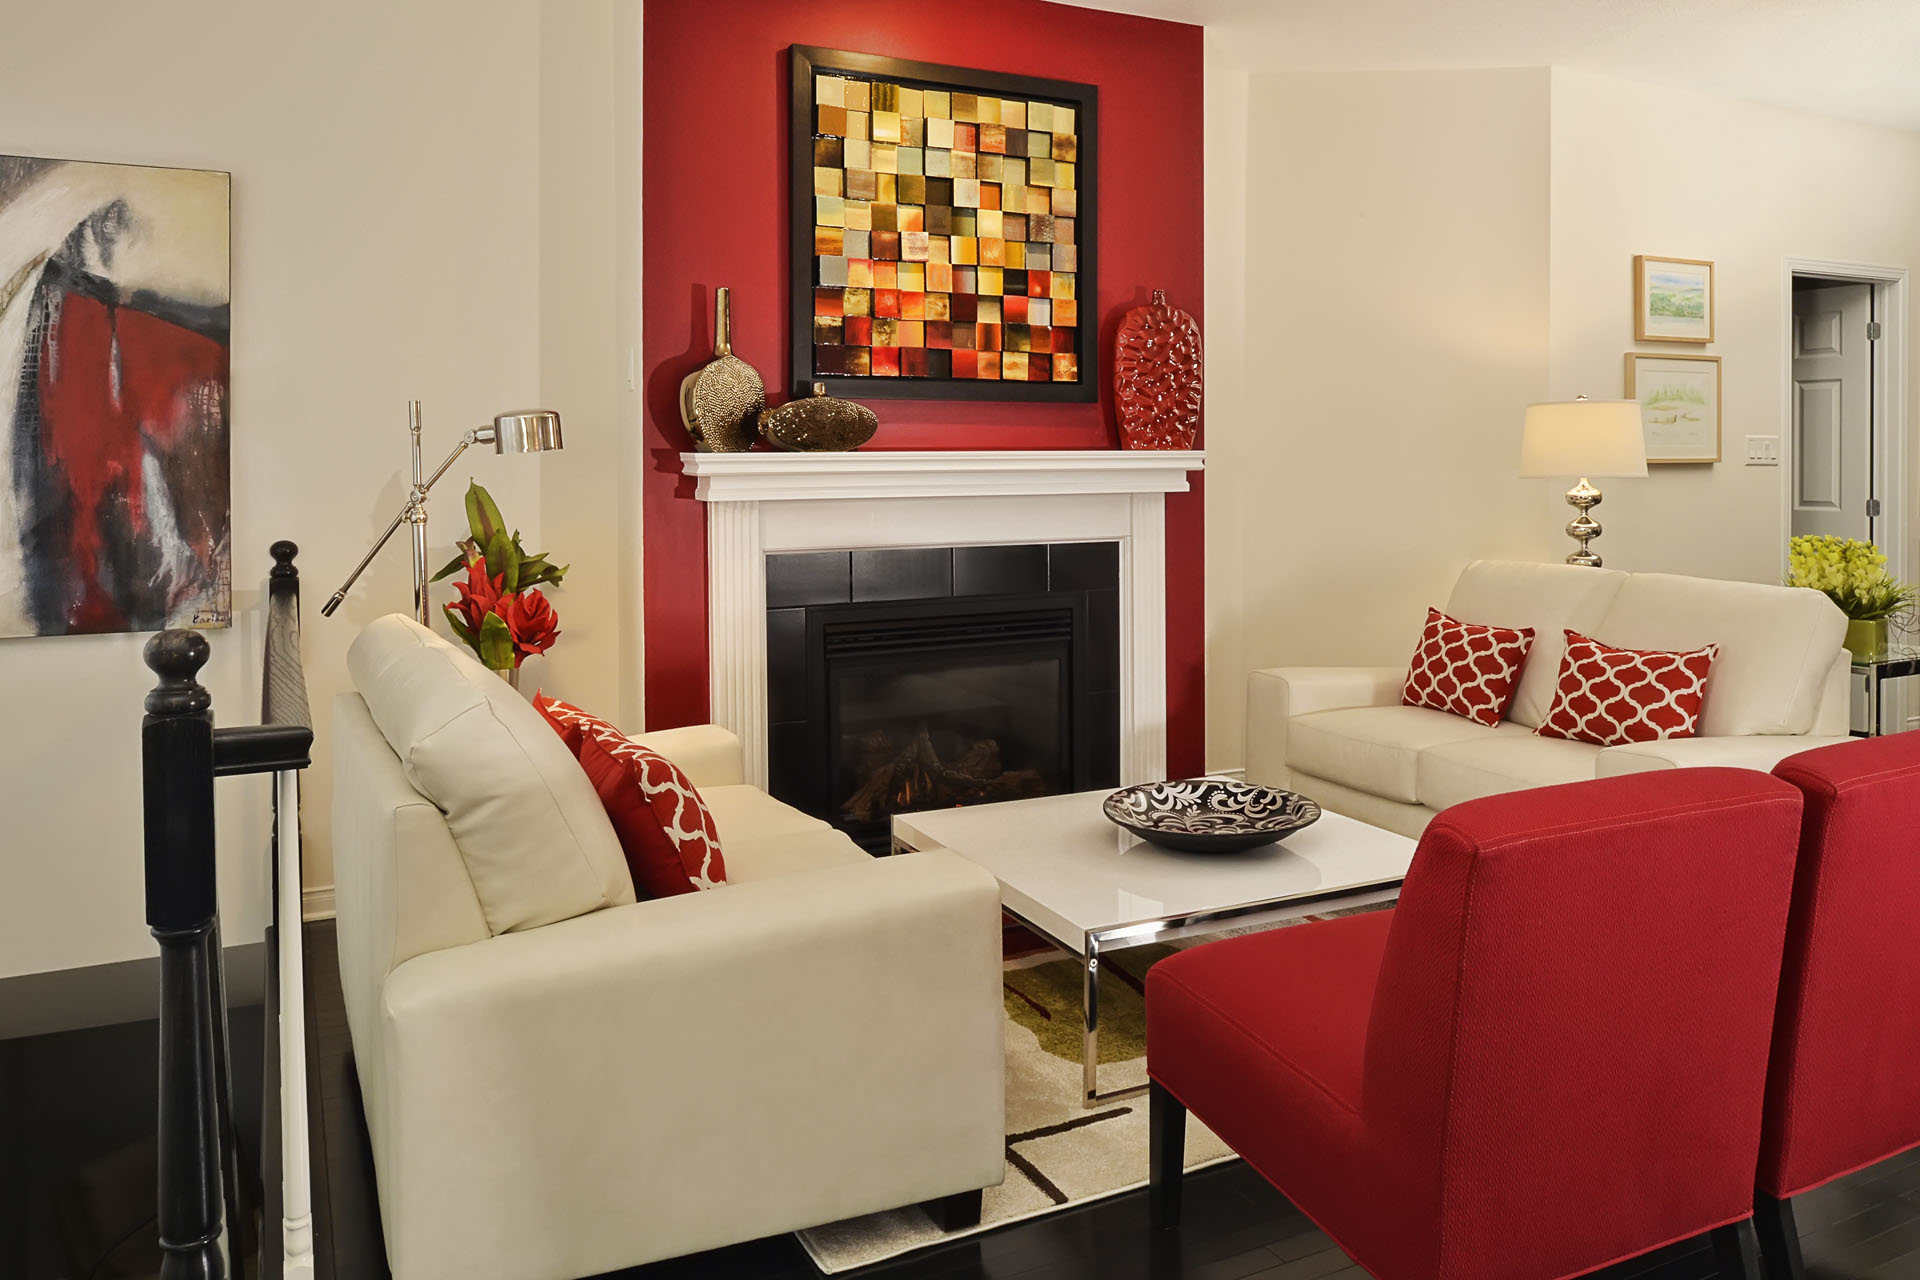 fireplace lounge with red and white furniture interior decoration